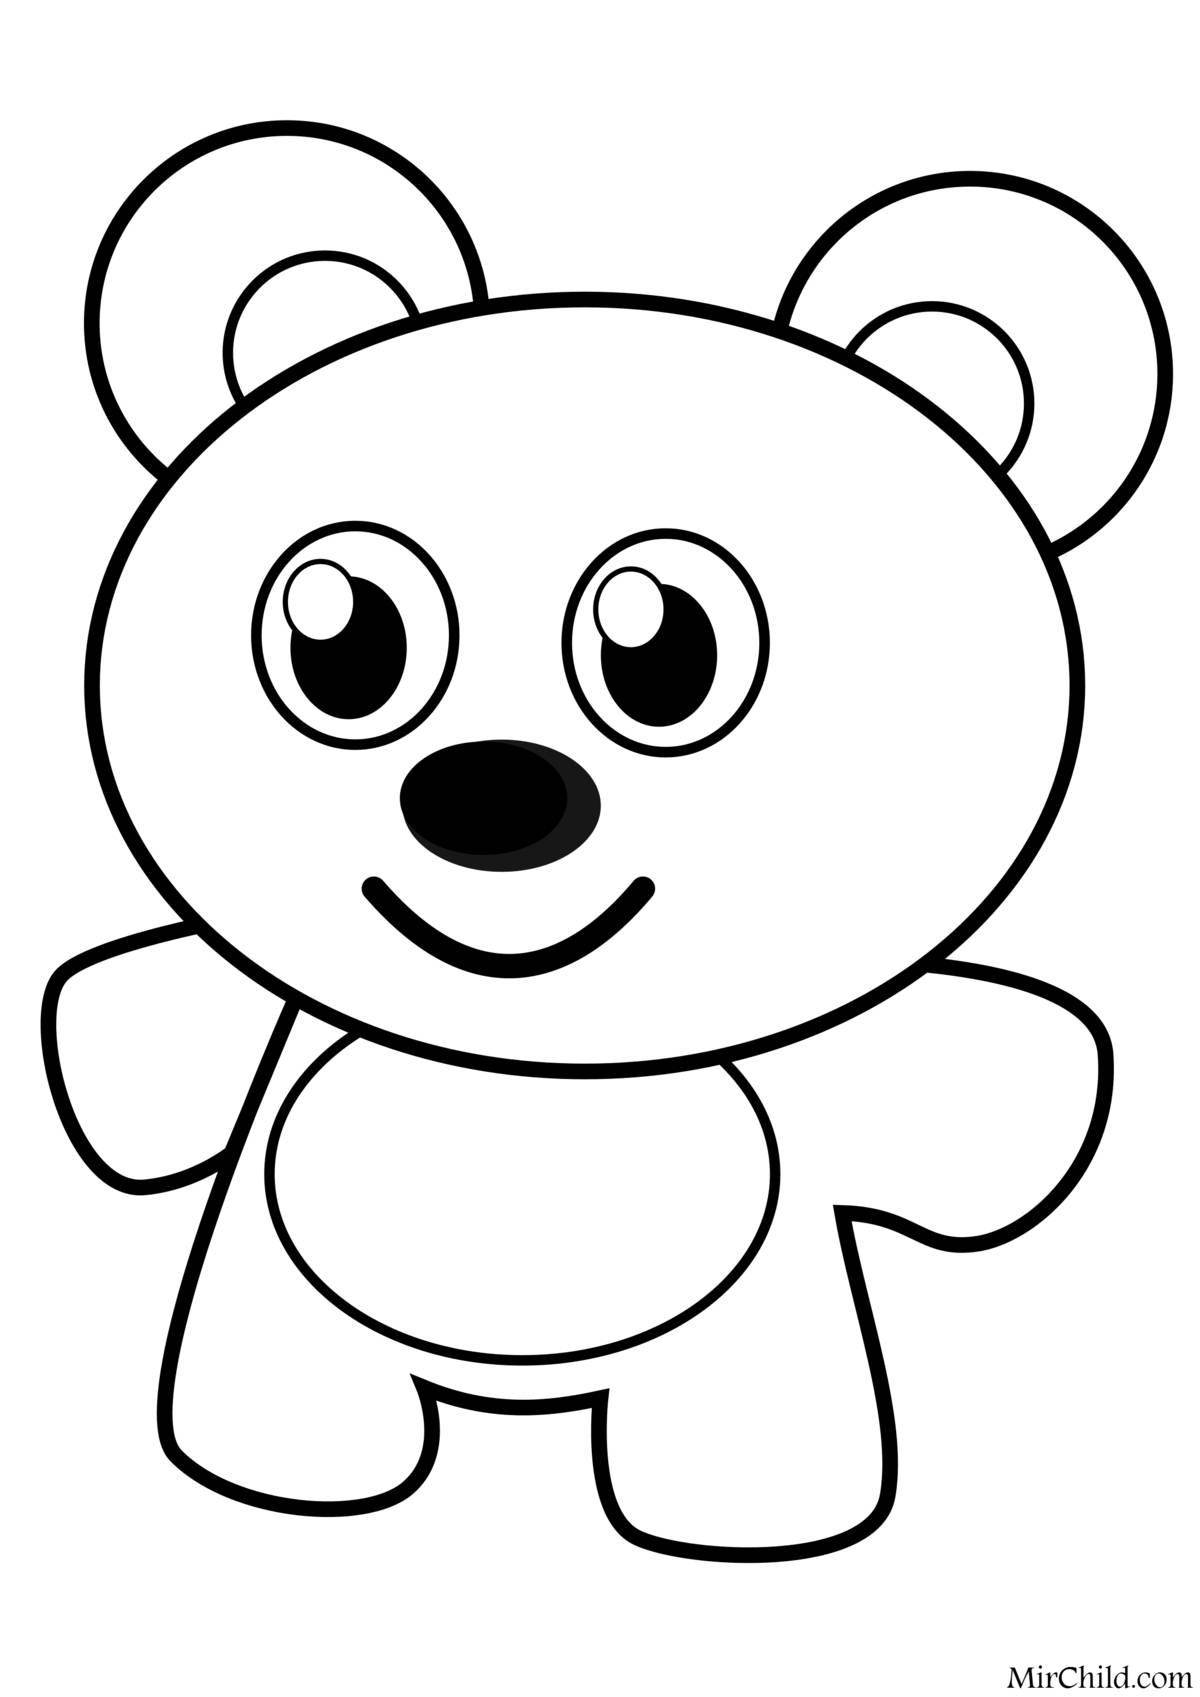 Colorful coloring pages for preschoolers